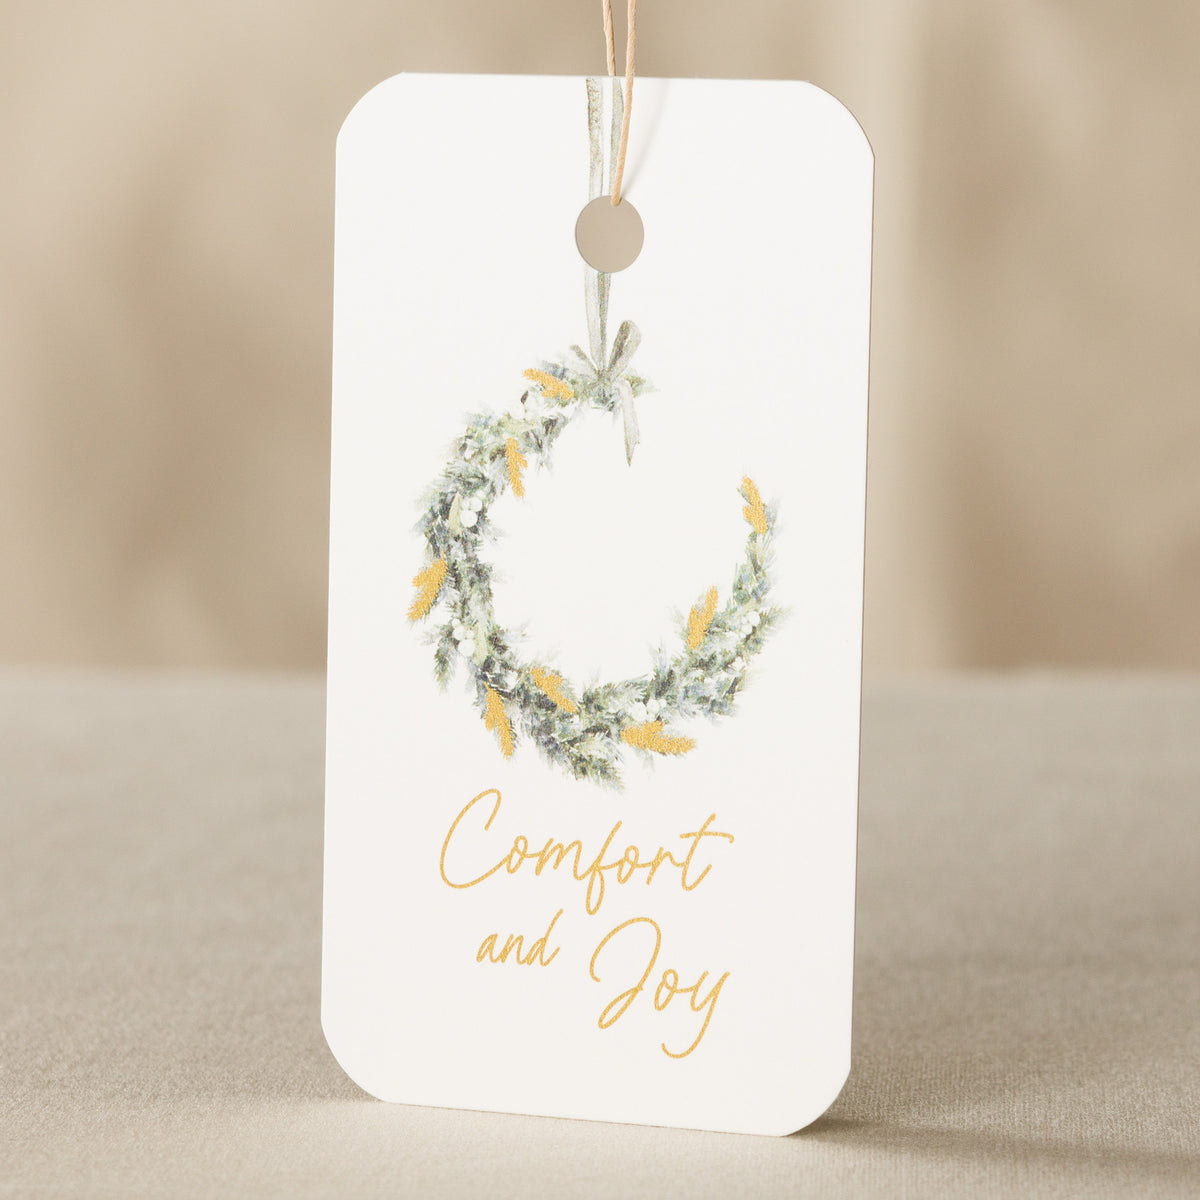 Balsam Wreath Gift Tag - 10 Pack